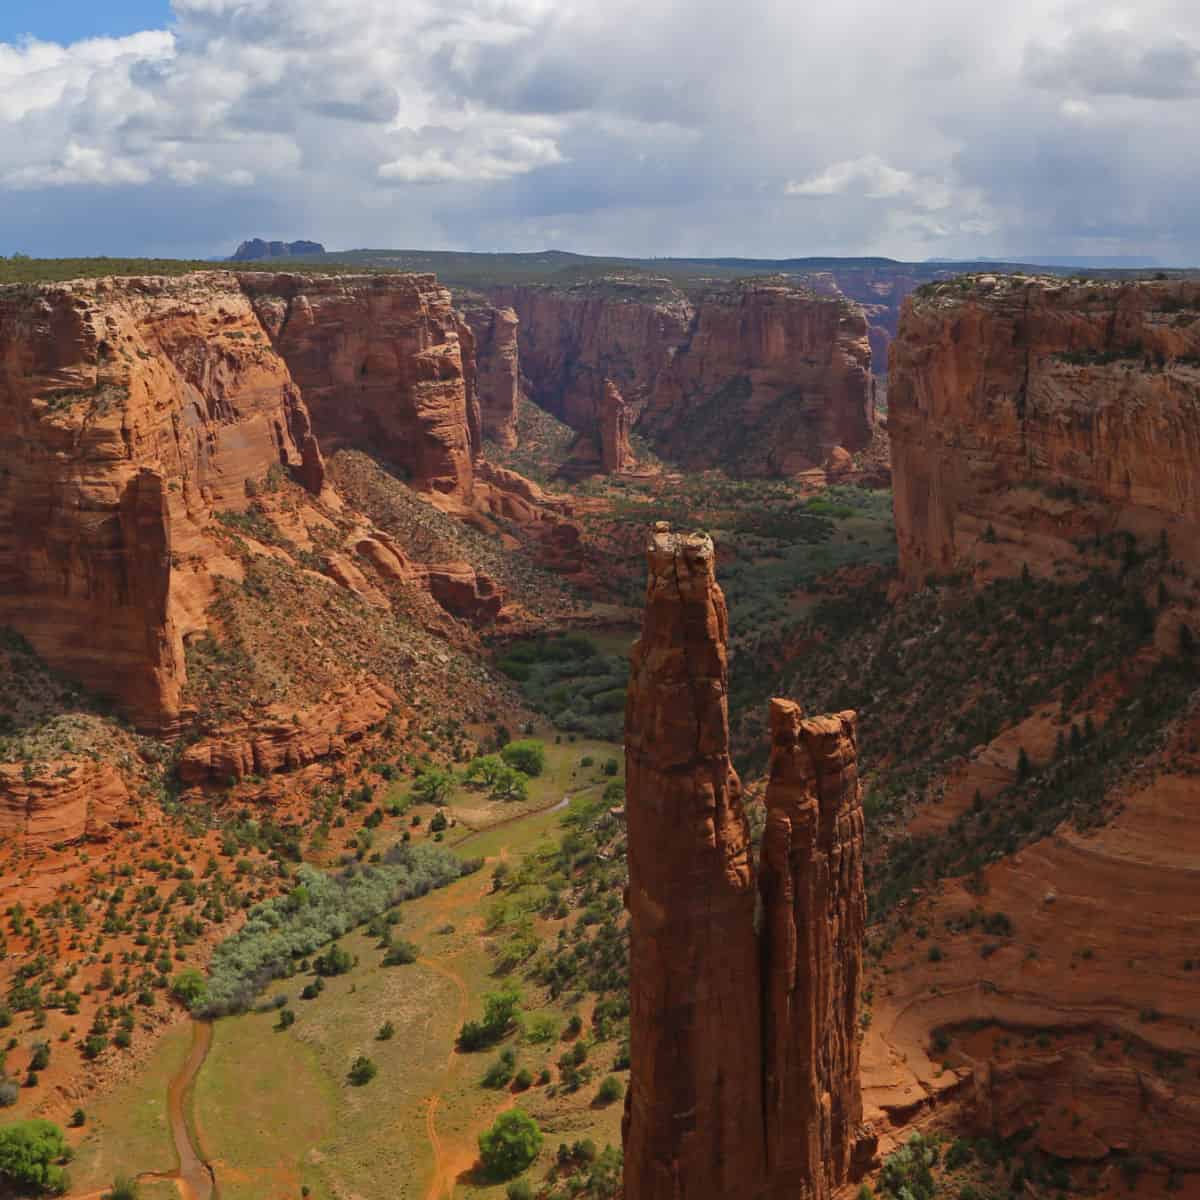 Looking out at Canyon de Chelly with Spider Rock 